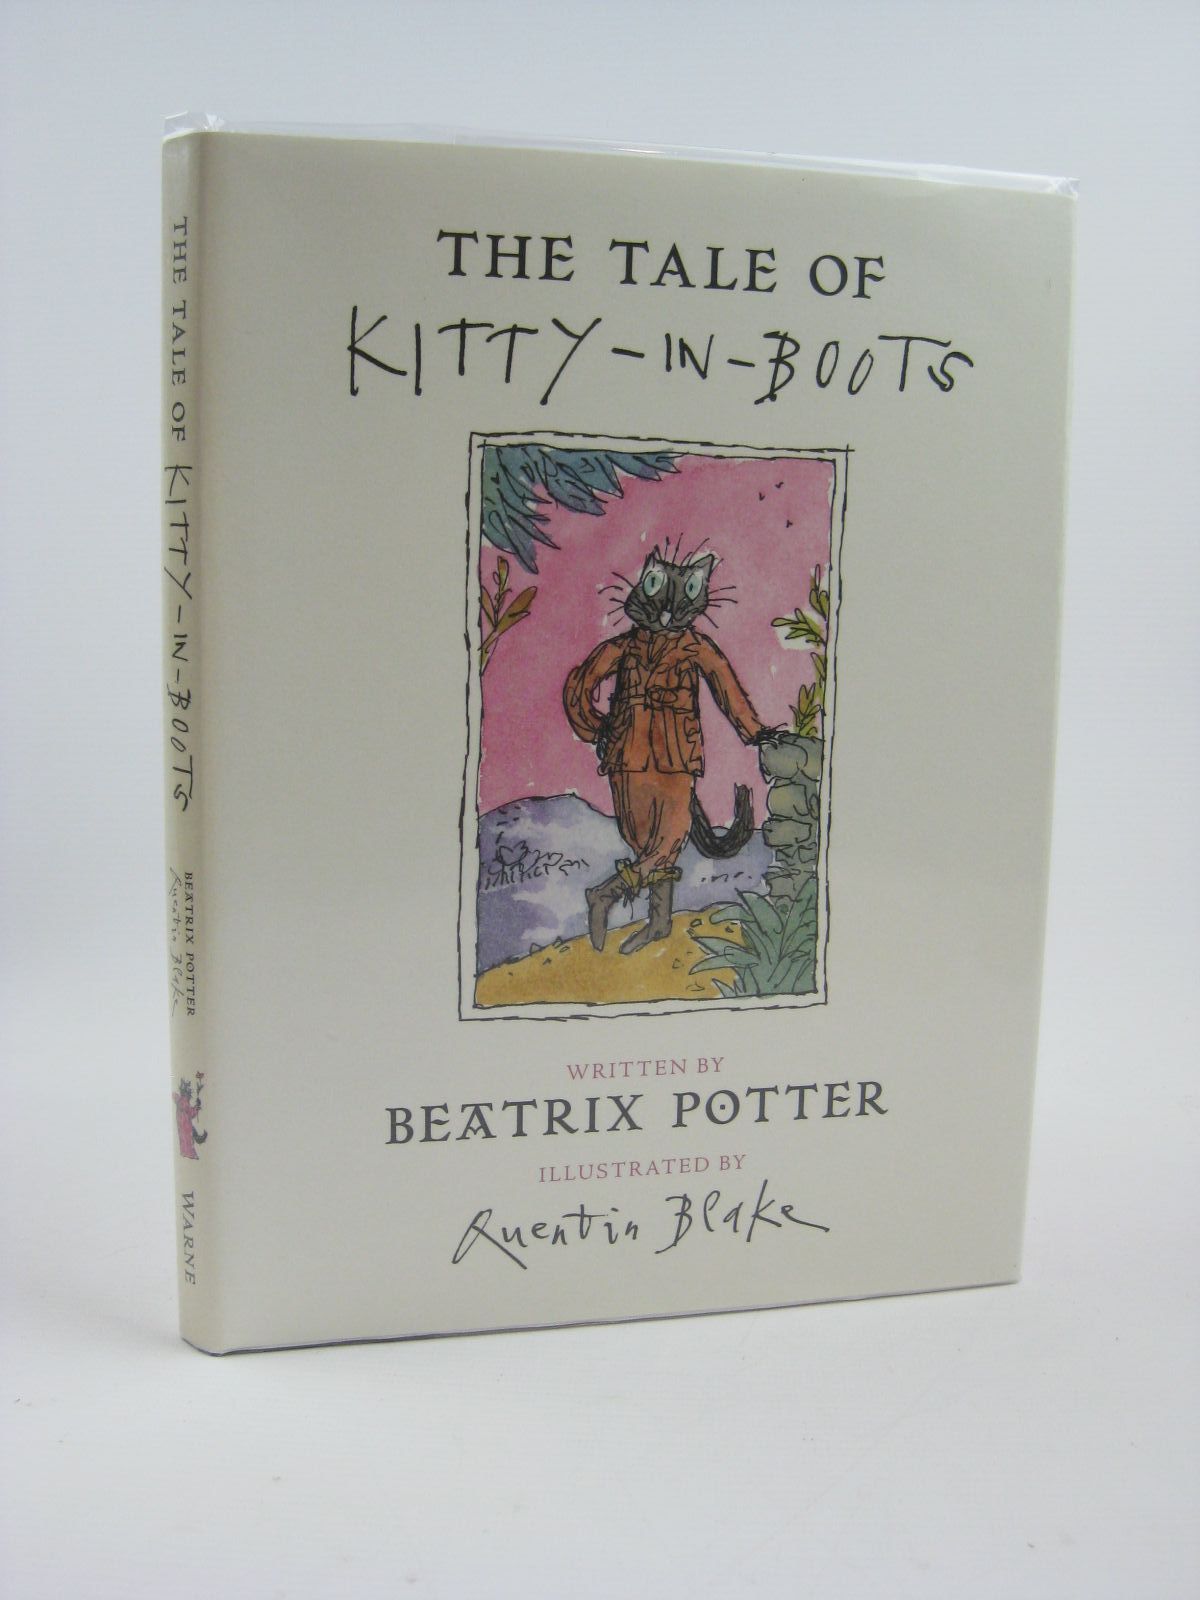 Cover of THE TALE OF KITTY-IN-BOOTS by Beatrix Potter